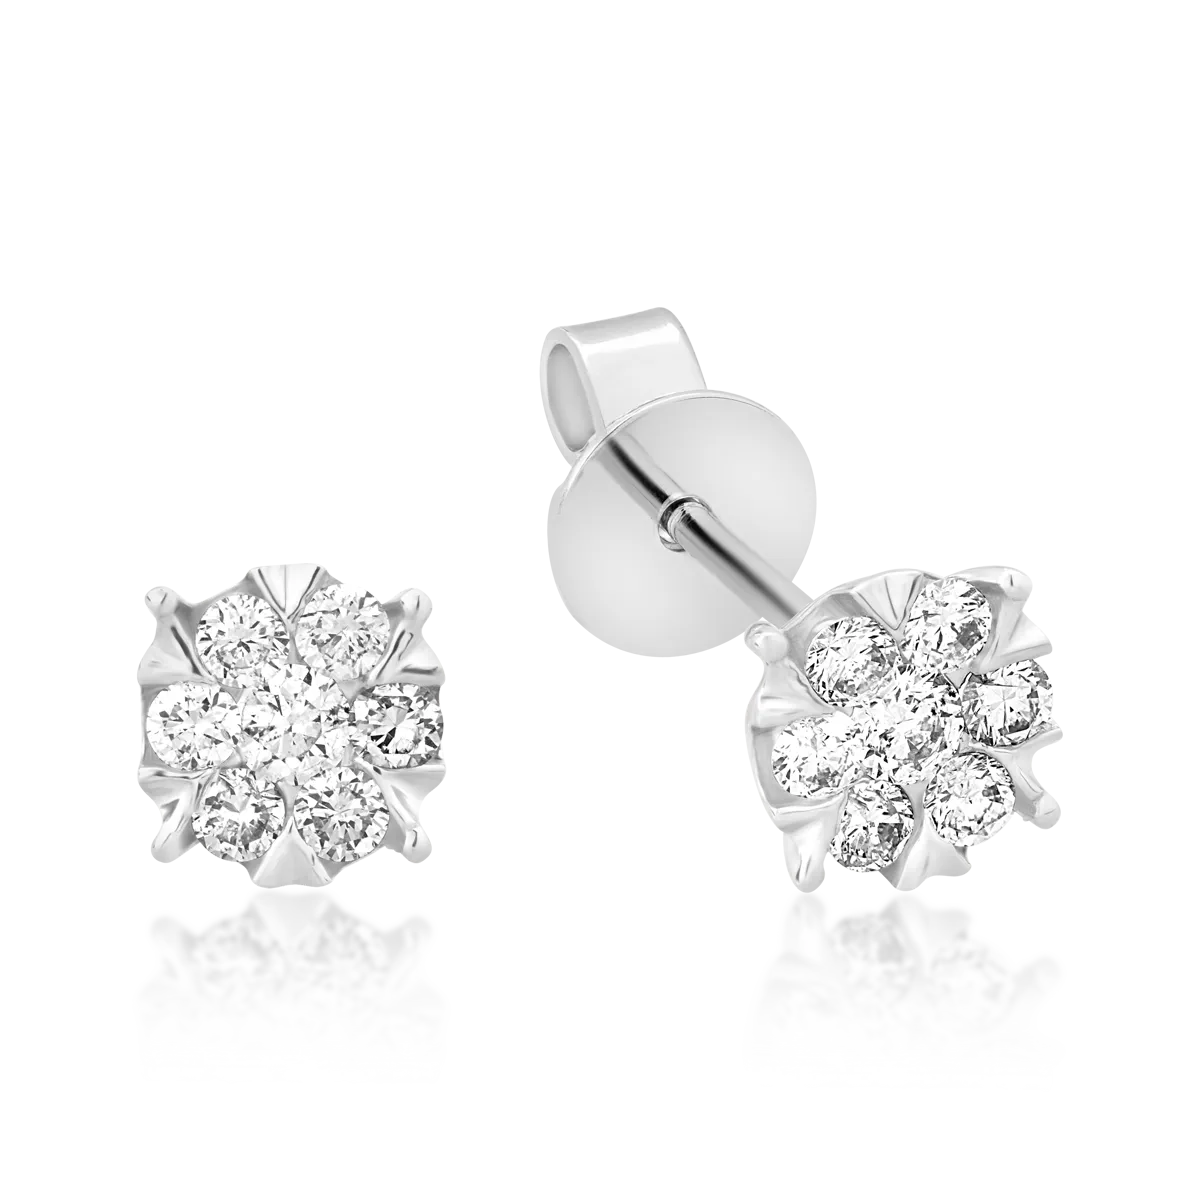 White gold earrings with 0.215ct diamonds